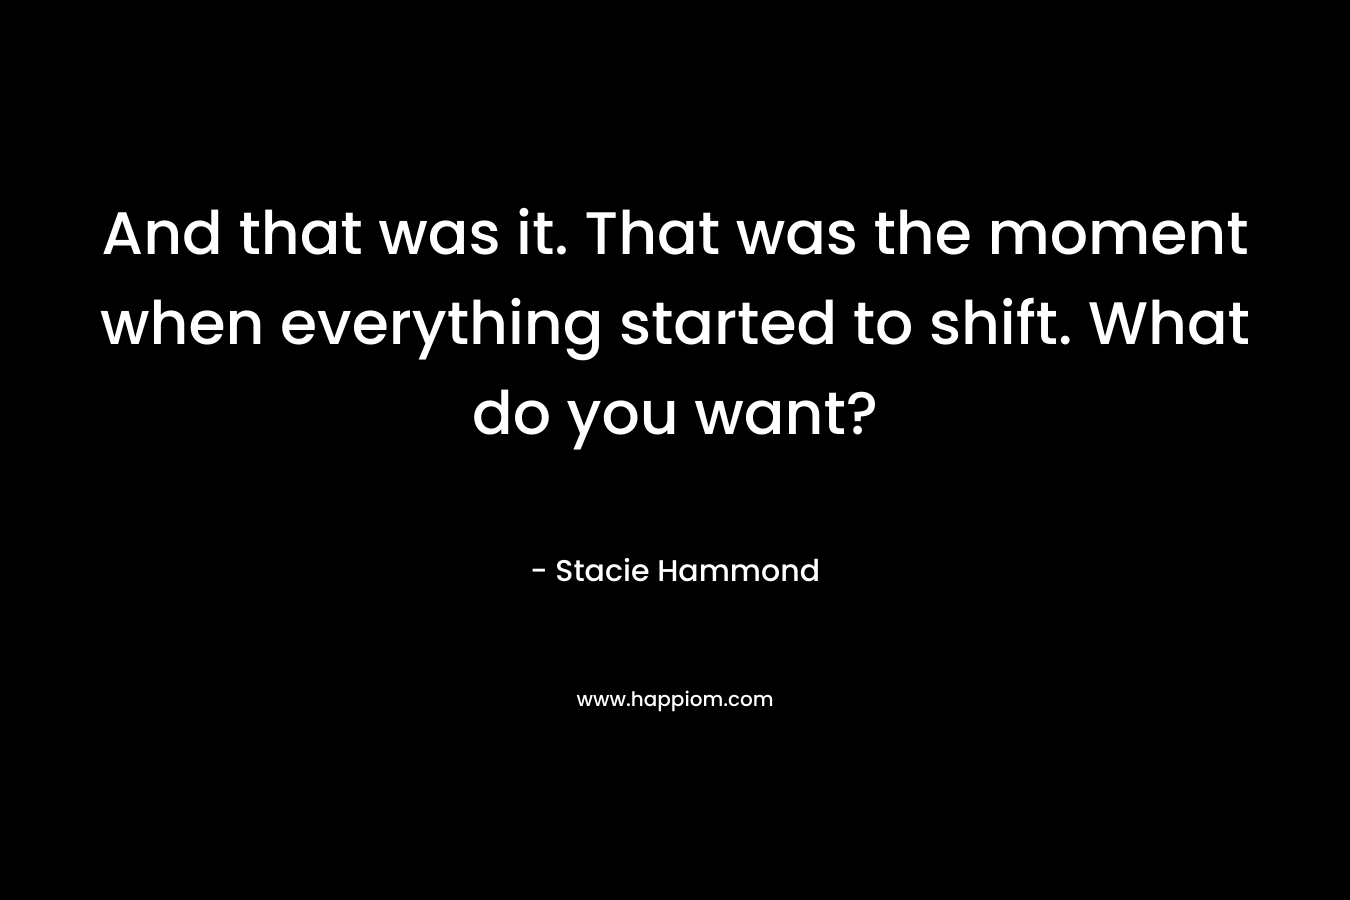 And that was it. That was the moment when everything started to shift. What do you want? – Stacie Hammond